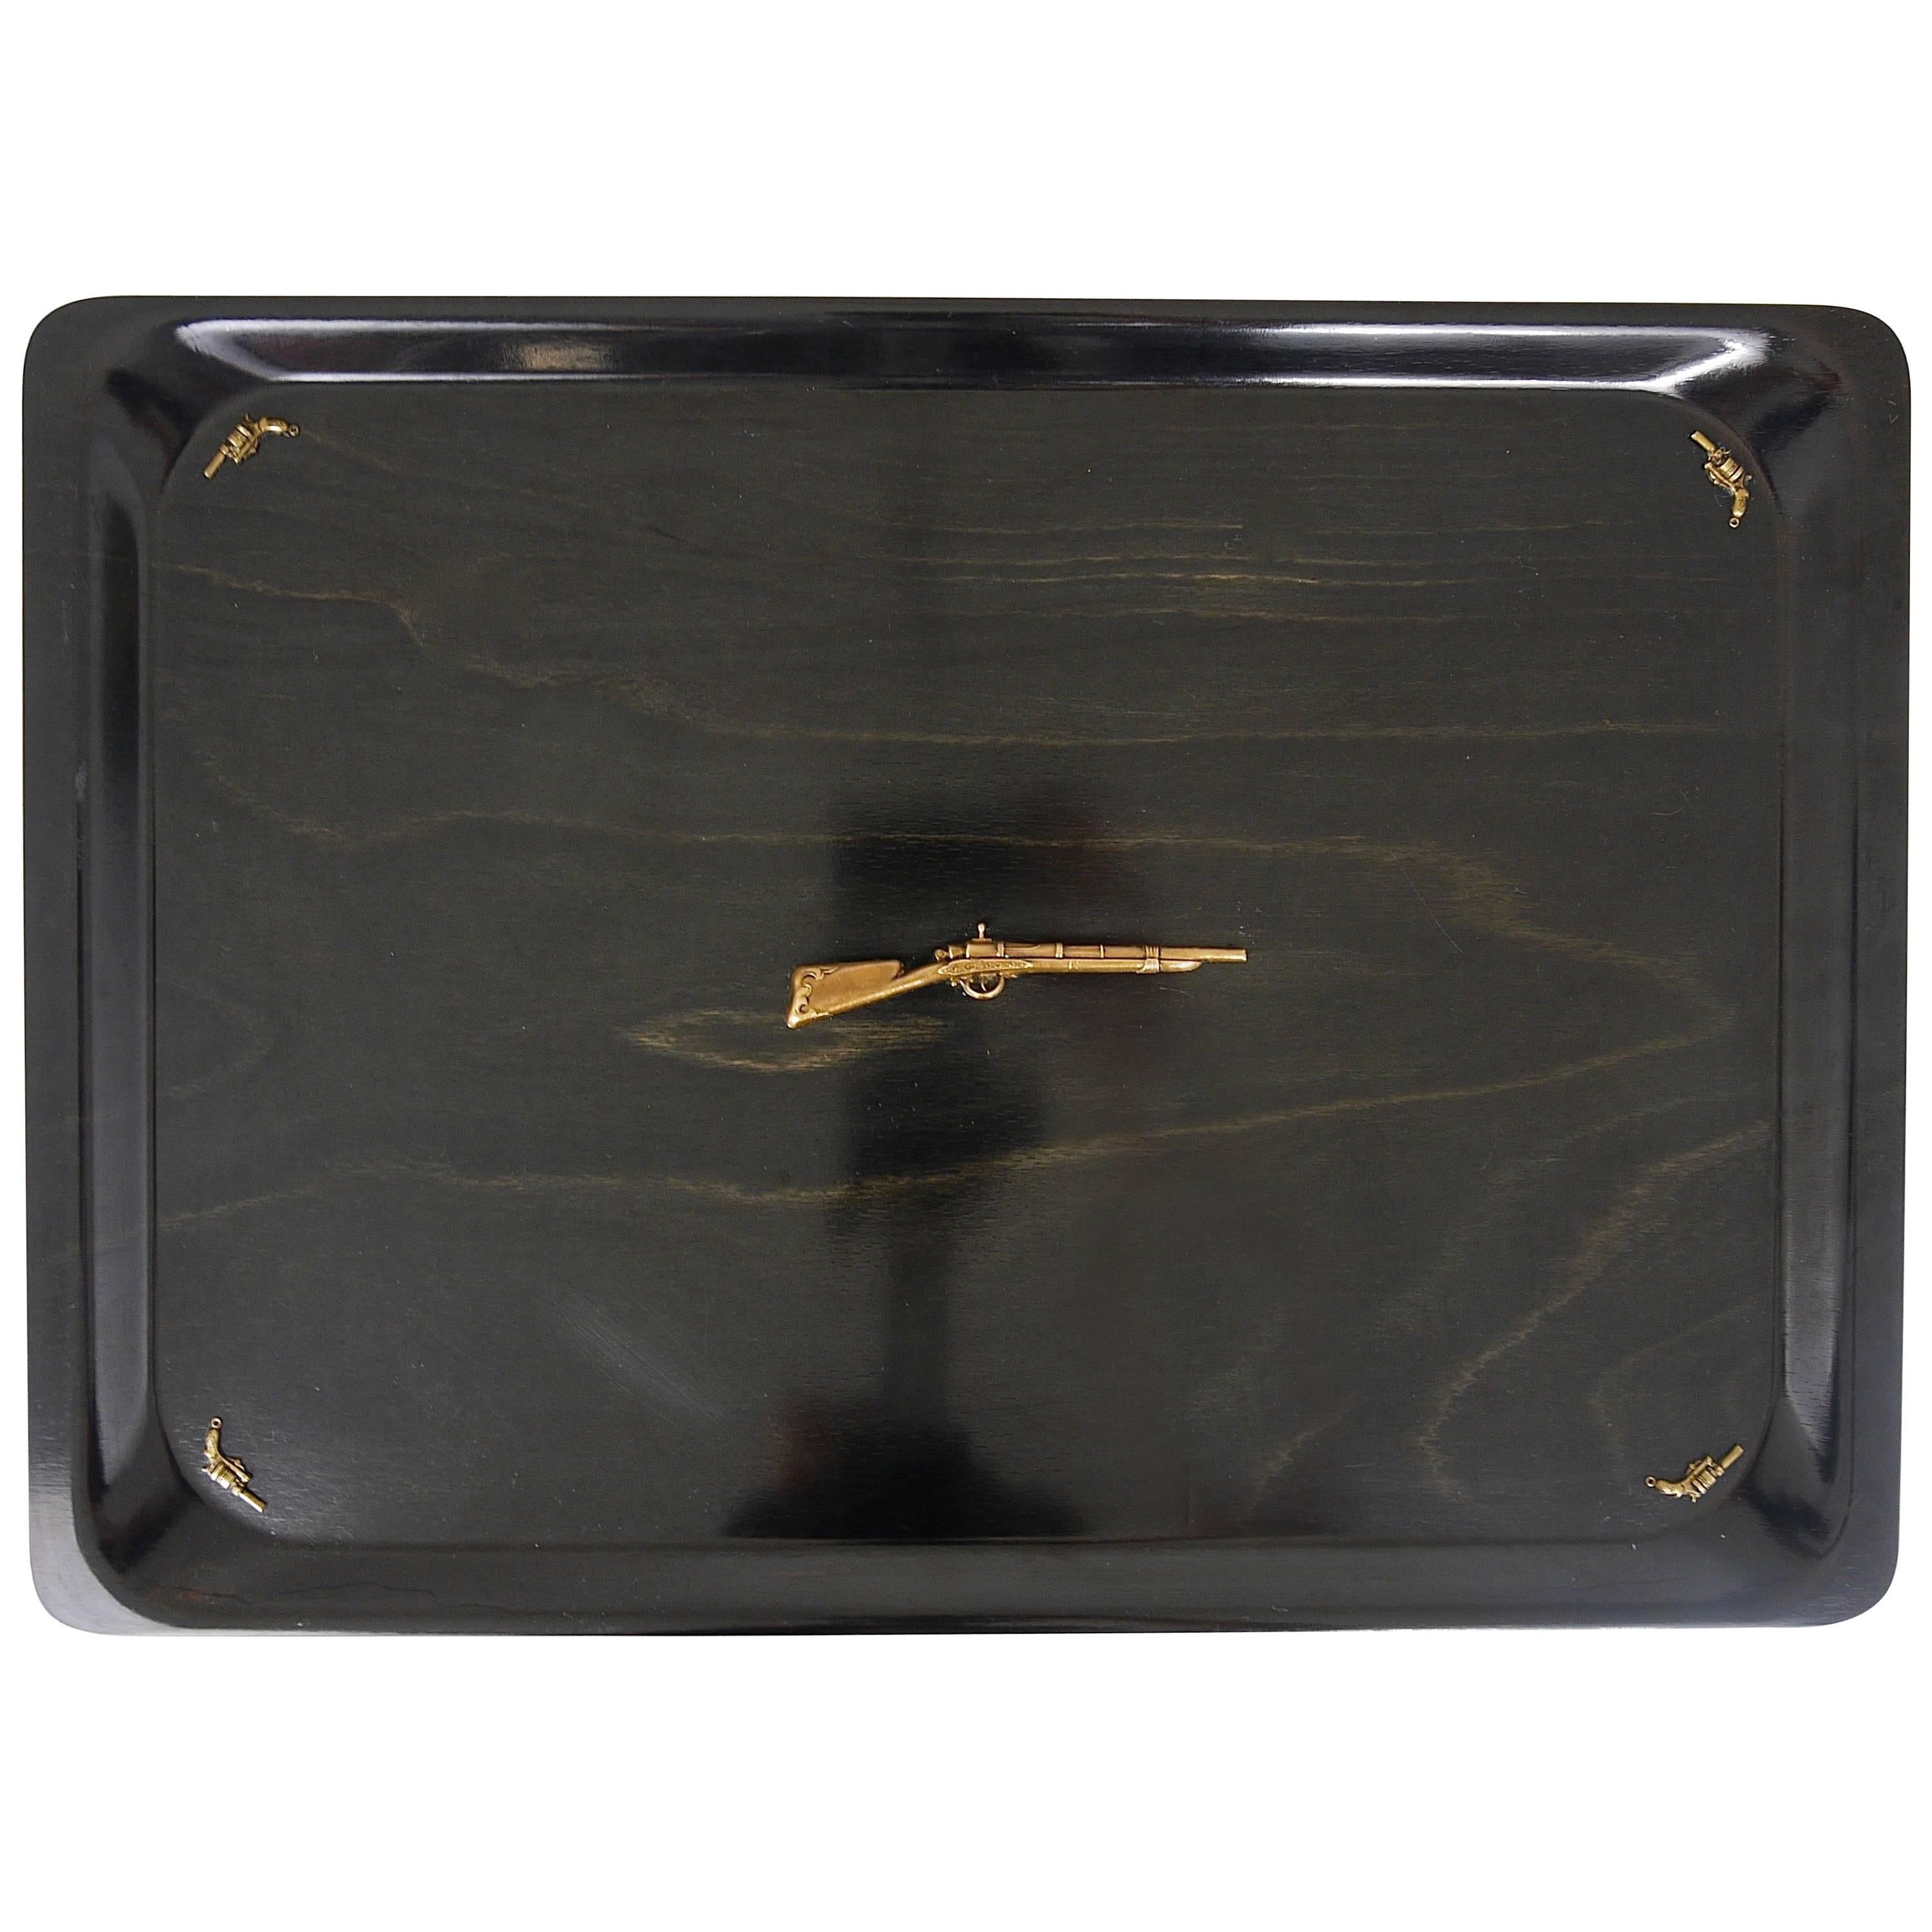 Black Colt and Rifle Serving Tray, Piero Fornasetti Style, Italy, 1960s